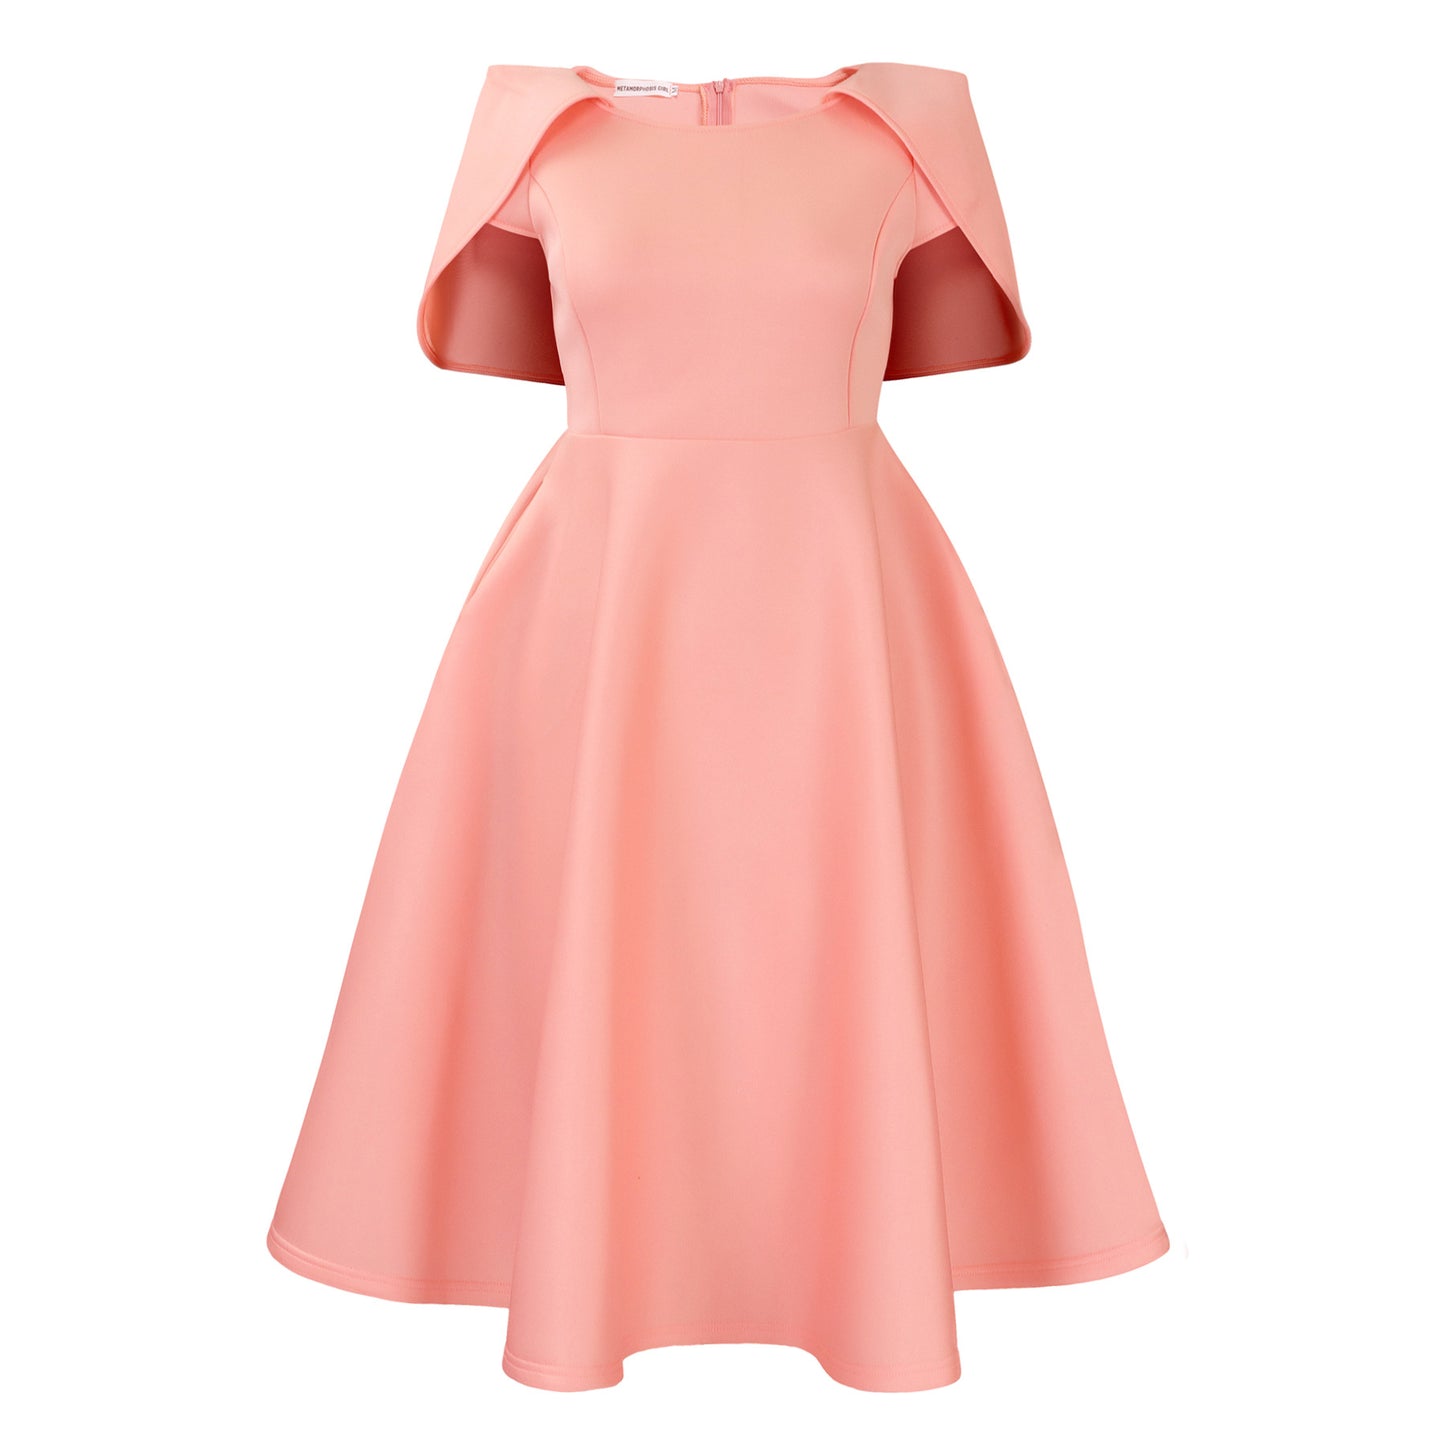 Fashion Banquet Party Swing Ladies Dress